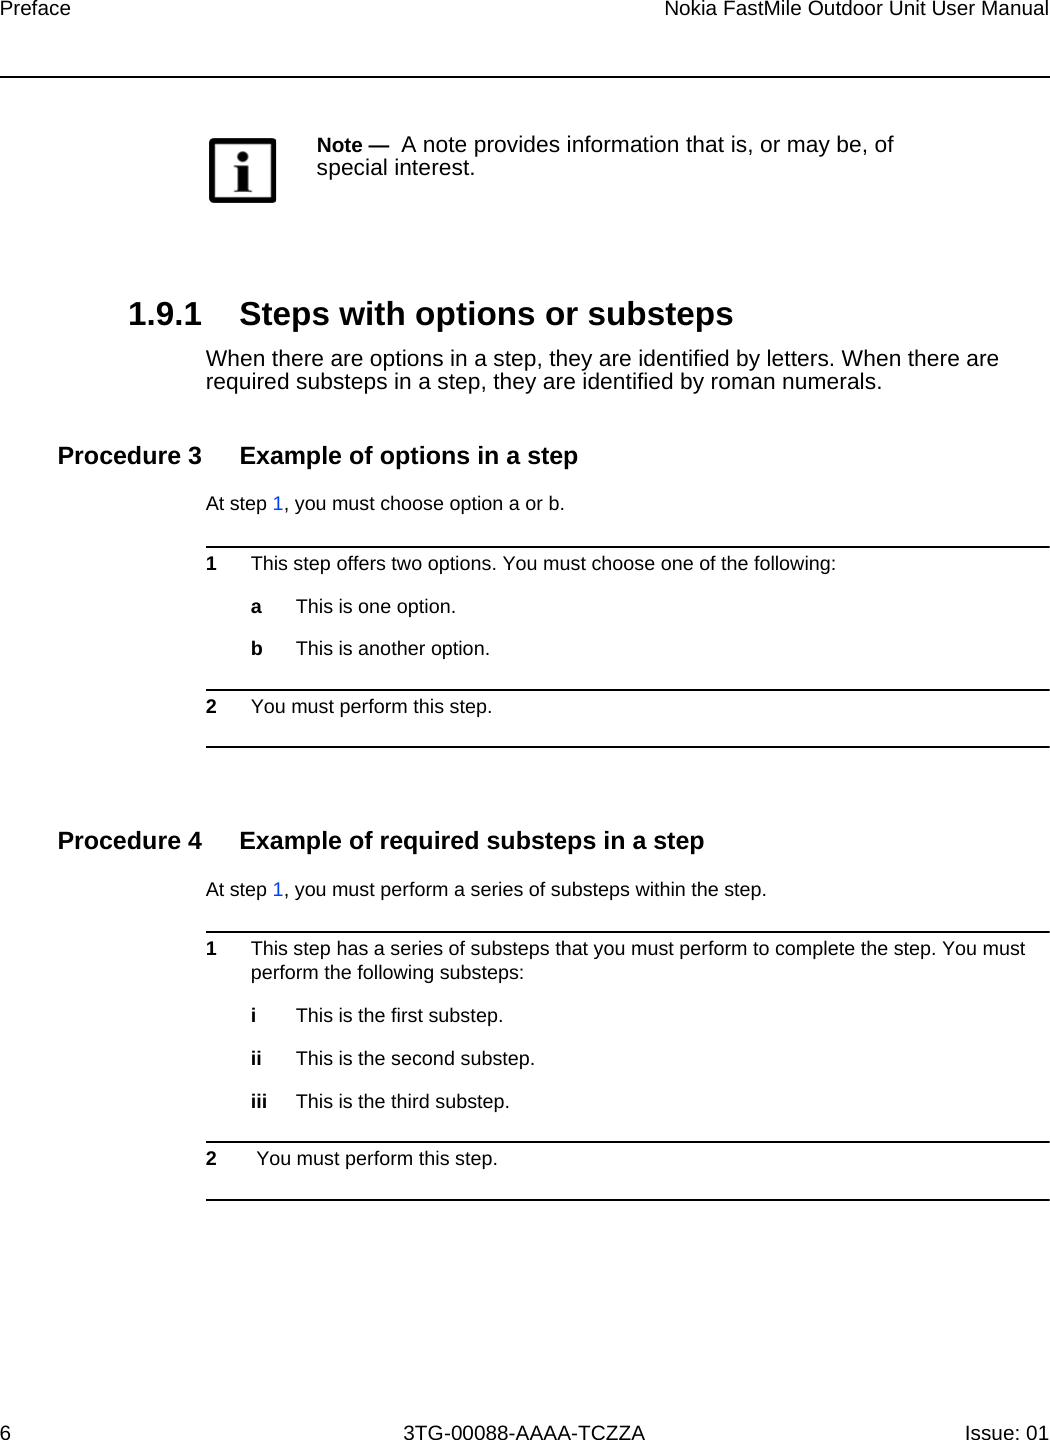 Preface6Nokia FastMile Outdoor Unit User Manual3TG-00088-AAAA-TCZZA Issue: 01 1.9.1 Steps with options or substepsWhen there are options in a step, they are identified by letters. When there are required substeps in a step, they are identified by roman numerals.Procedure 3 Example of options in a stepAt step 1, you must choose option a or b. 1This step offers two options. You must choose one of the following:aThis is one option.bThis is another option.2You must perform this step.Procedure 4 Example of required substeps in a stepAt step 1, you must perform a series of substeps within the step. 1This step has a series of substeps that you must perform to complete the step. You must perform the following substeps:iThis is the first substep.ii This is the second substep.iii This is the third substep.2 You must perform this step.Note —  A note provides information that is, or may be, of special interest.